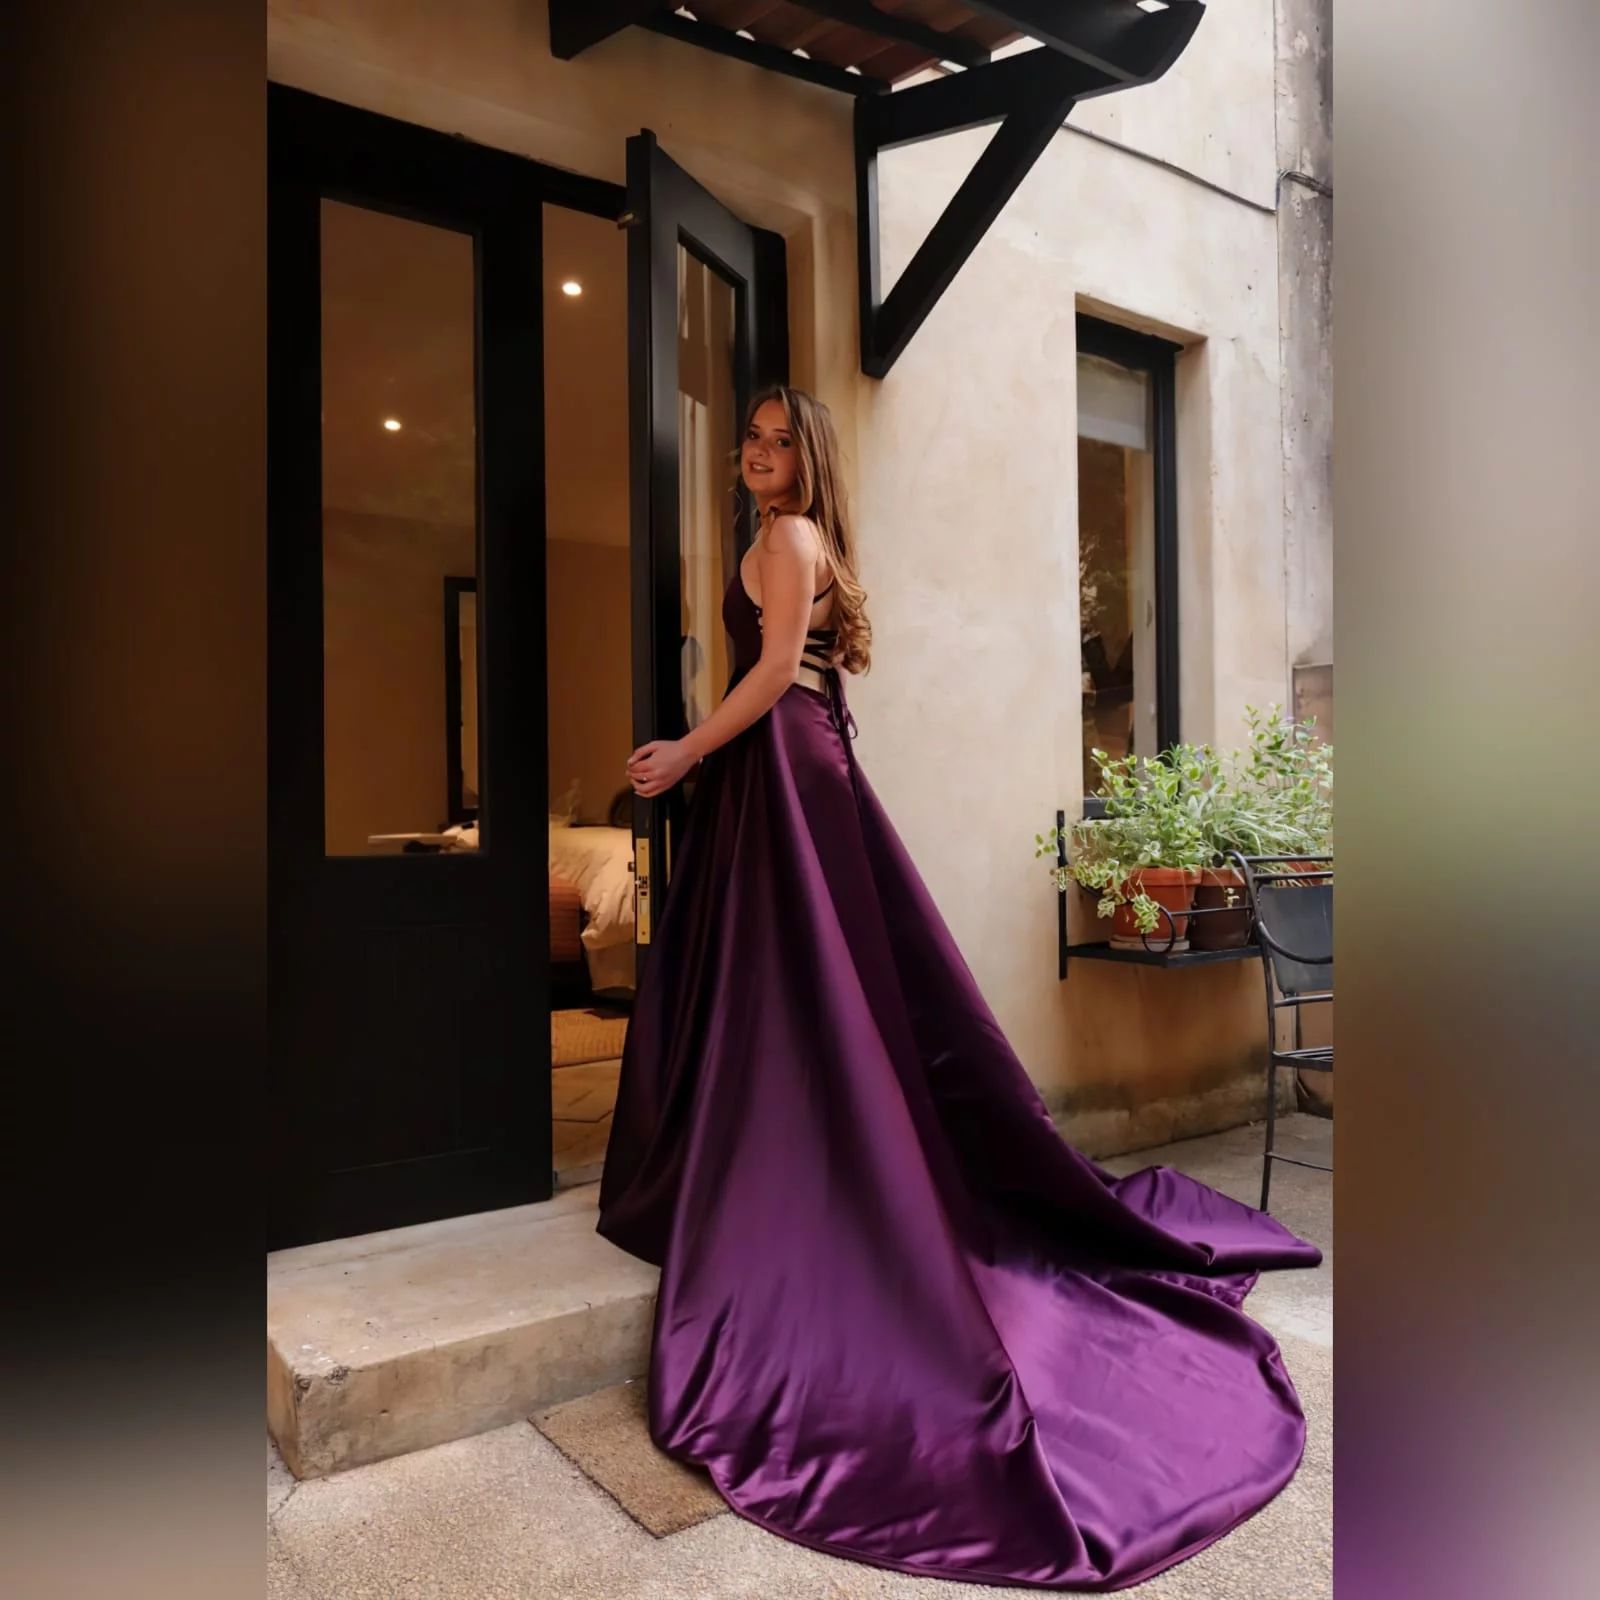 Plum long flowy prom dress with a plunging neckline 1 plum long flowy prom dress with a plunging neckline and a lace up open back with a slit and train.